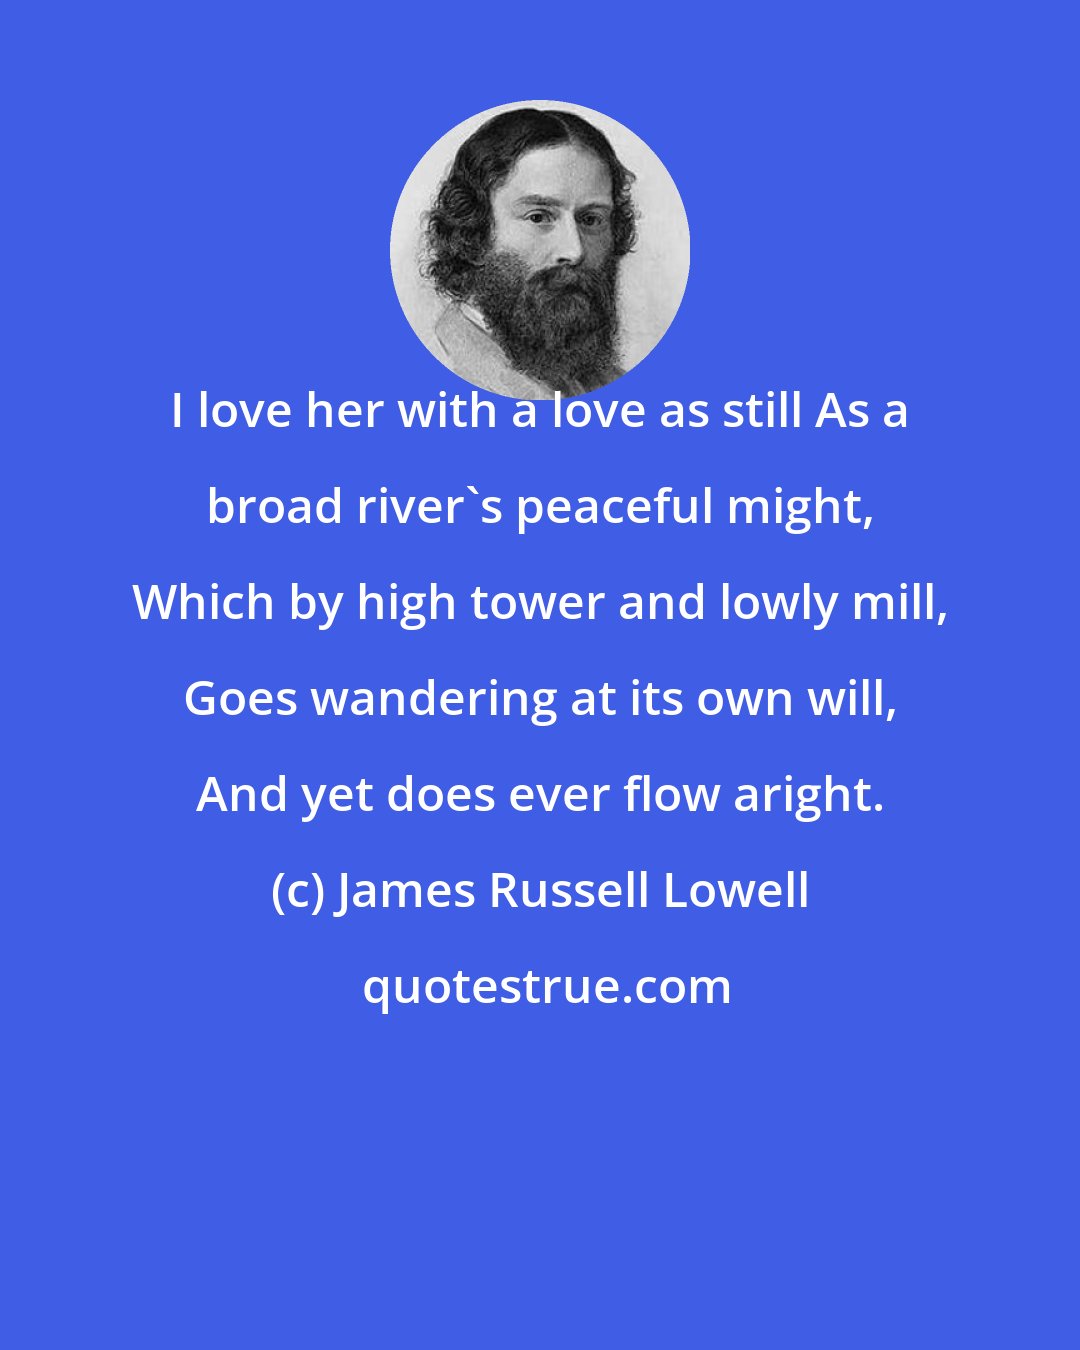 James Russell Lowell: I love her with a love as still As a broad river's peaceful might, Which by high tower and lowly mill, Goes wandering at its own will, And yet does ever flow aright.